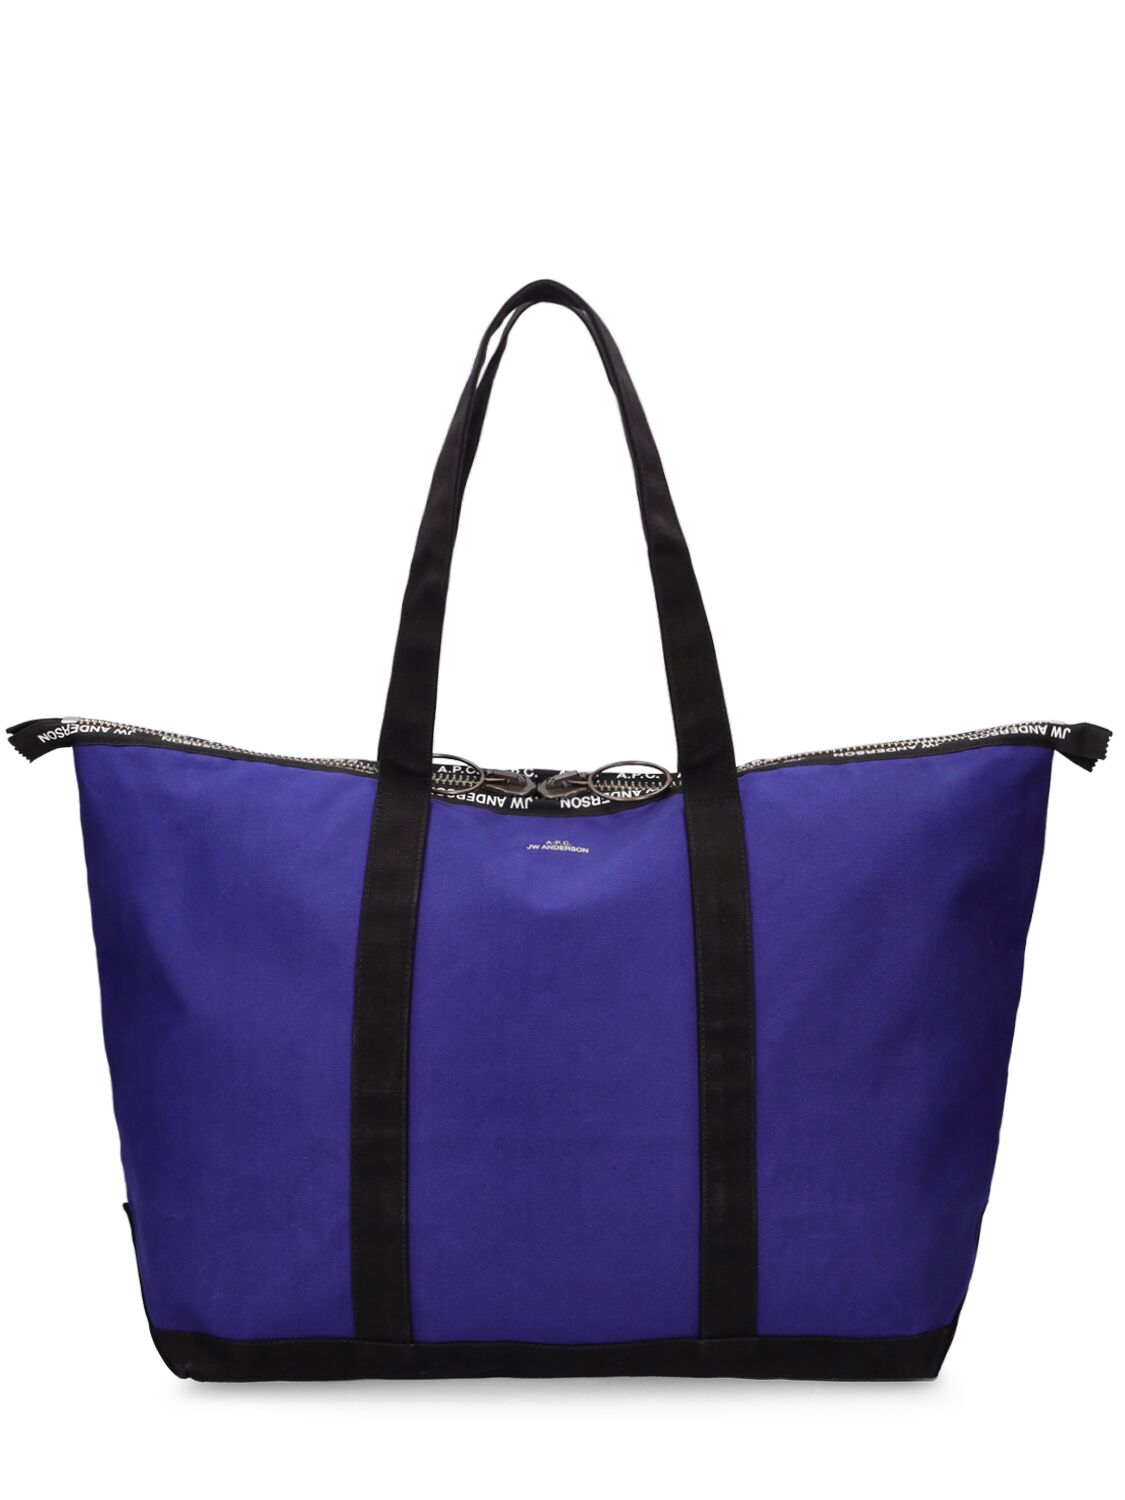 Image of A.p.c. X Jw Anderson Tote Bag